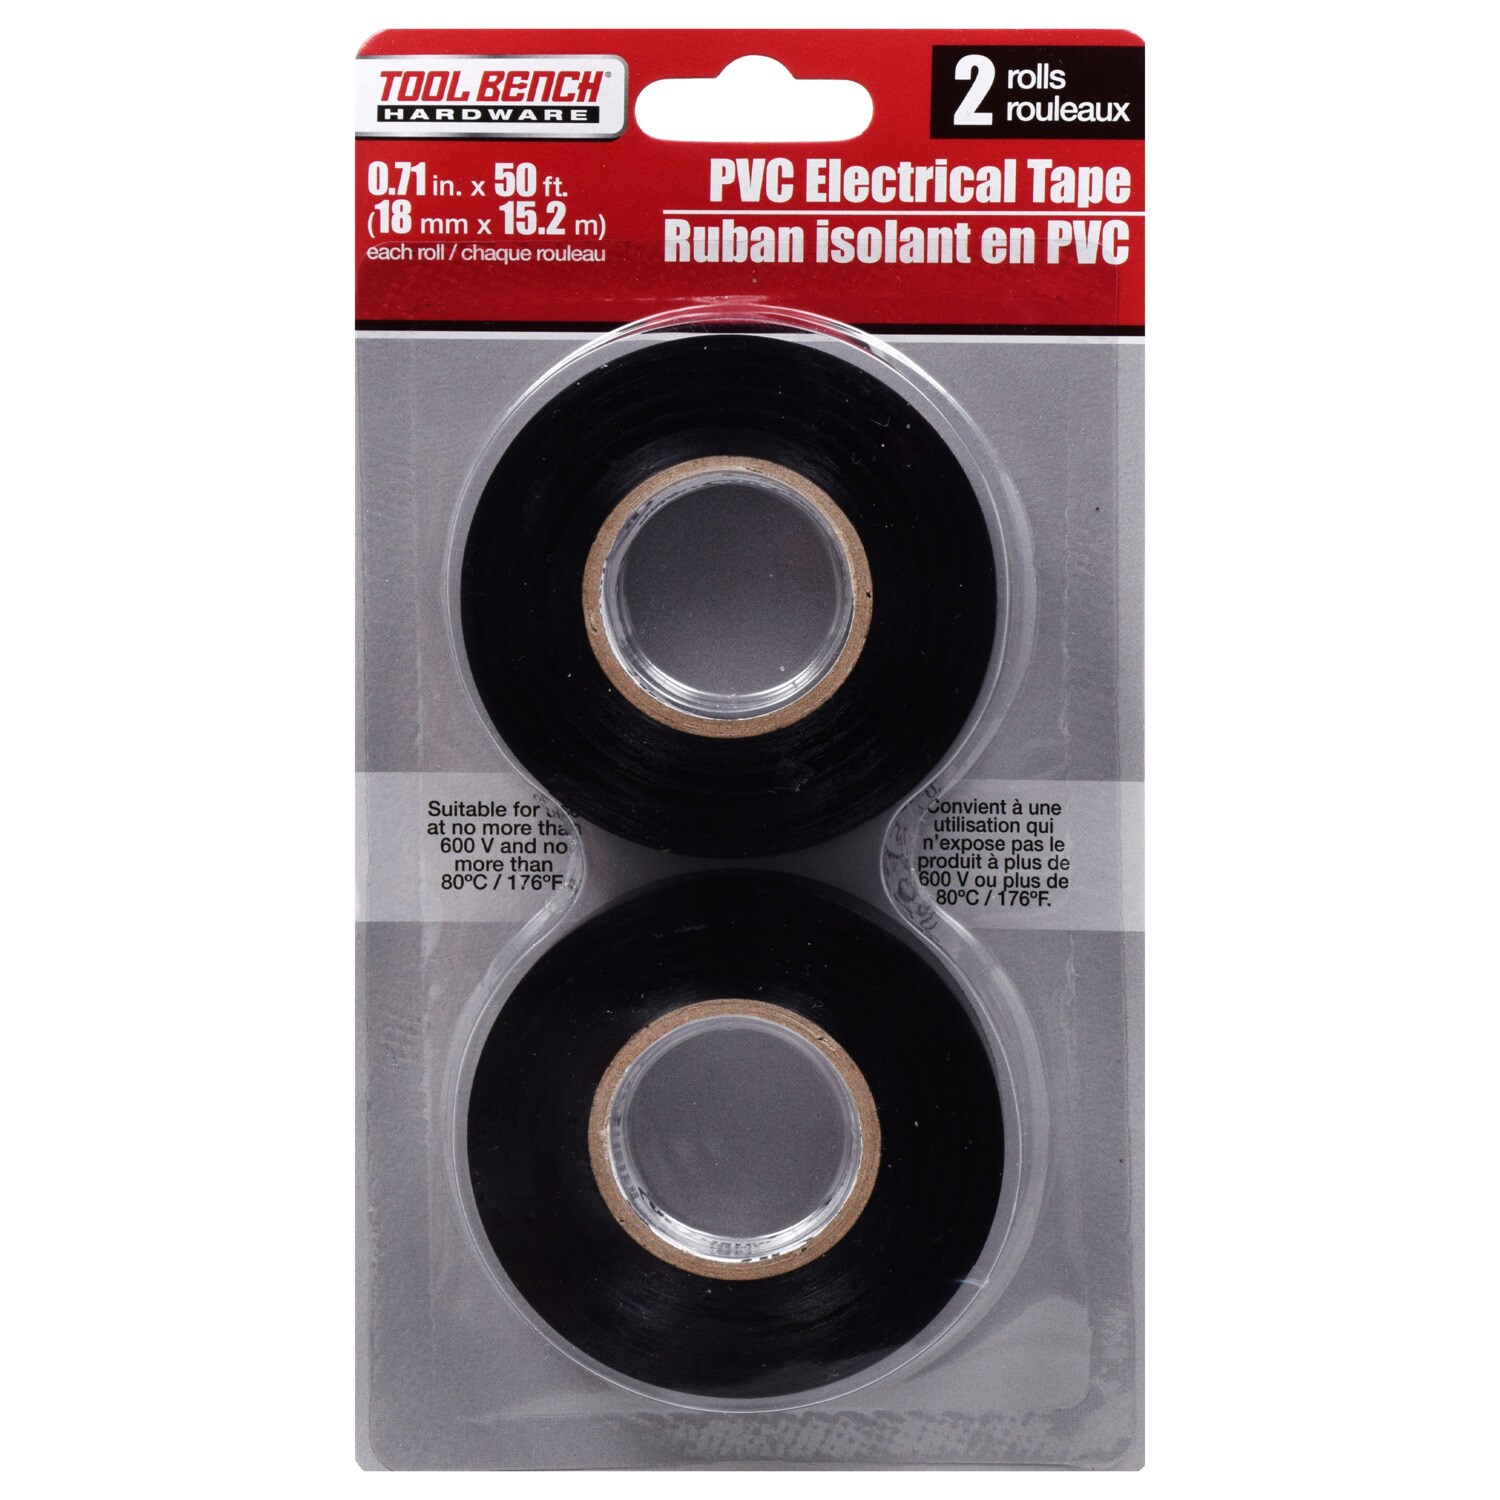 4 PACK Tool Bench PVC Electrical Tape 0.71 inches x 50 feet PVC Electrical 